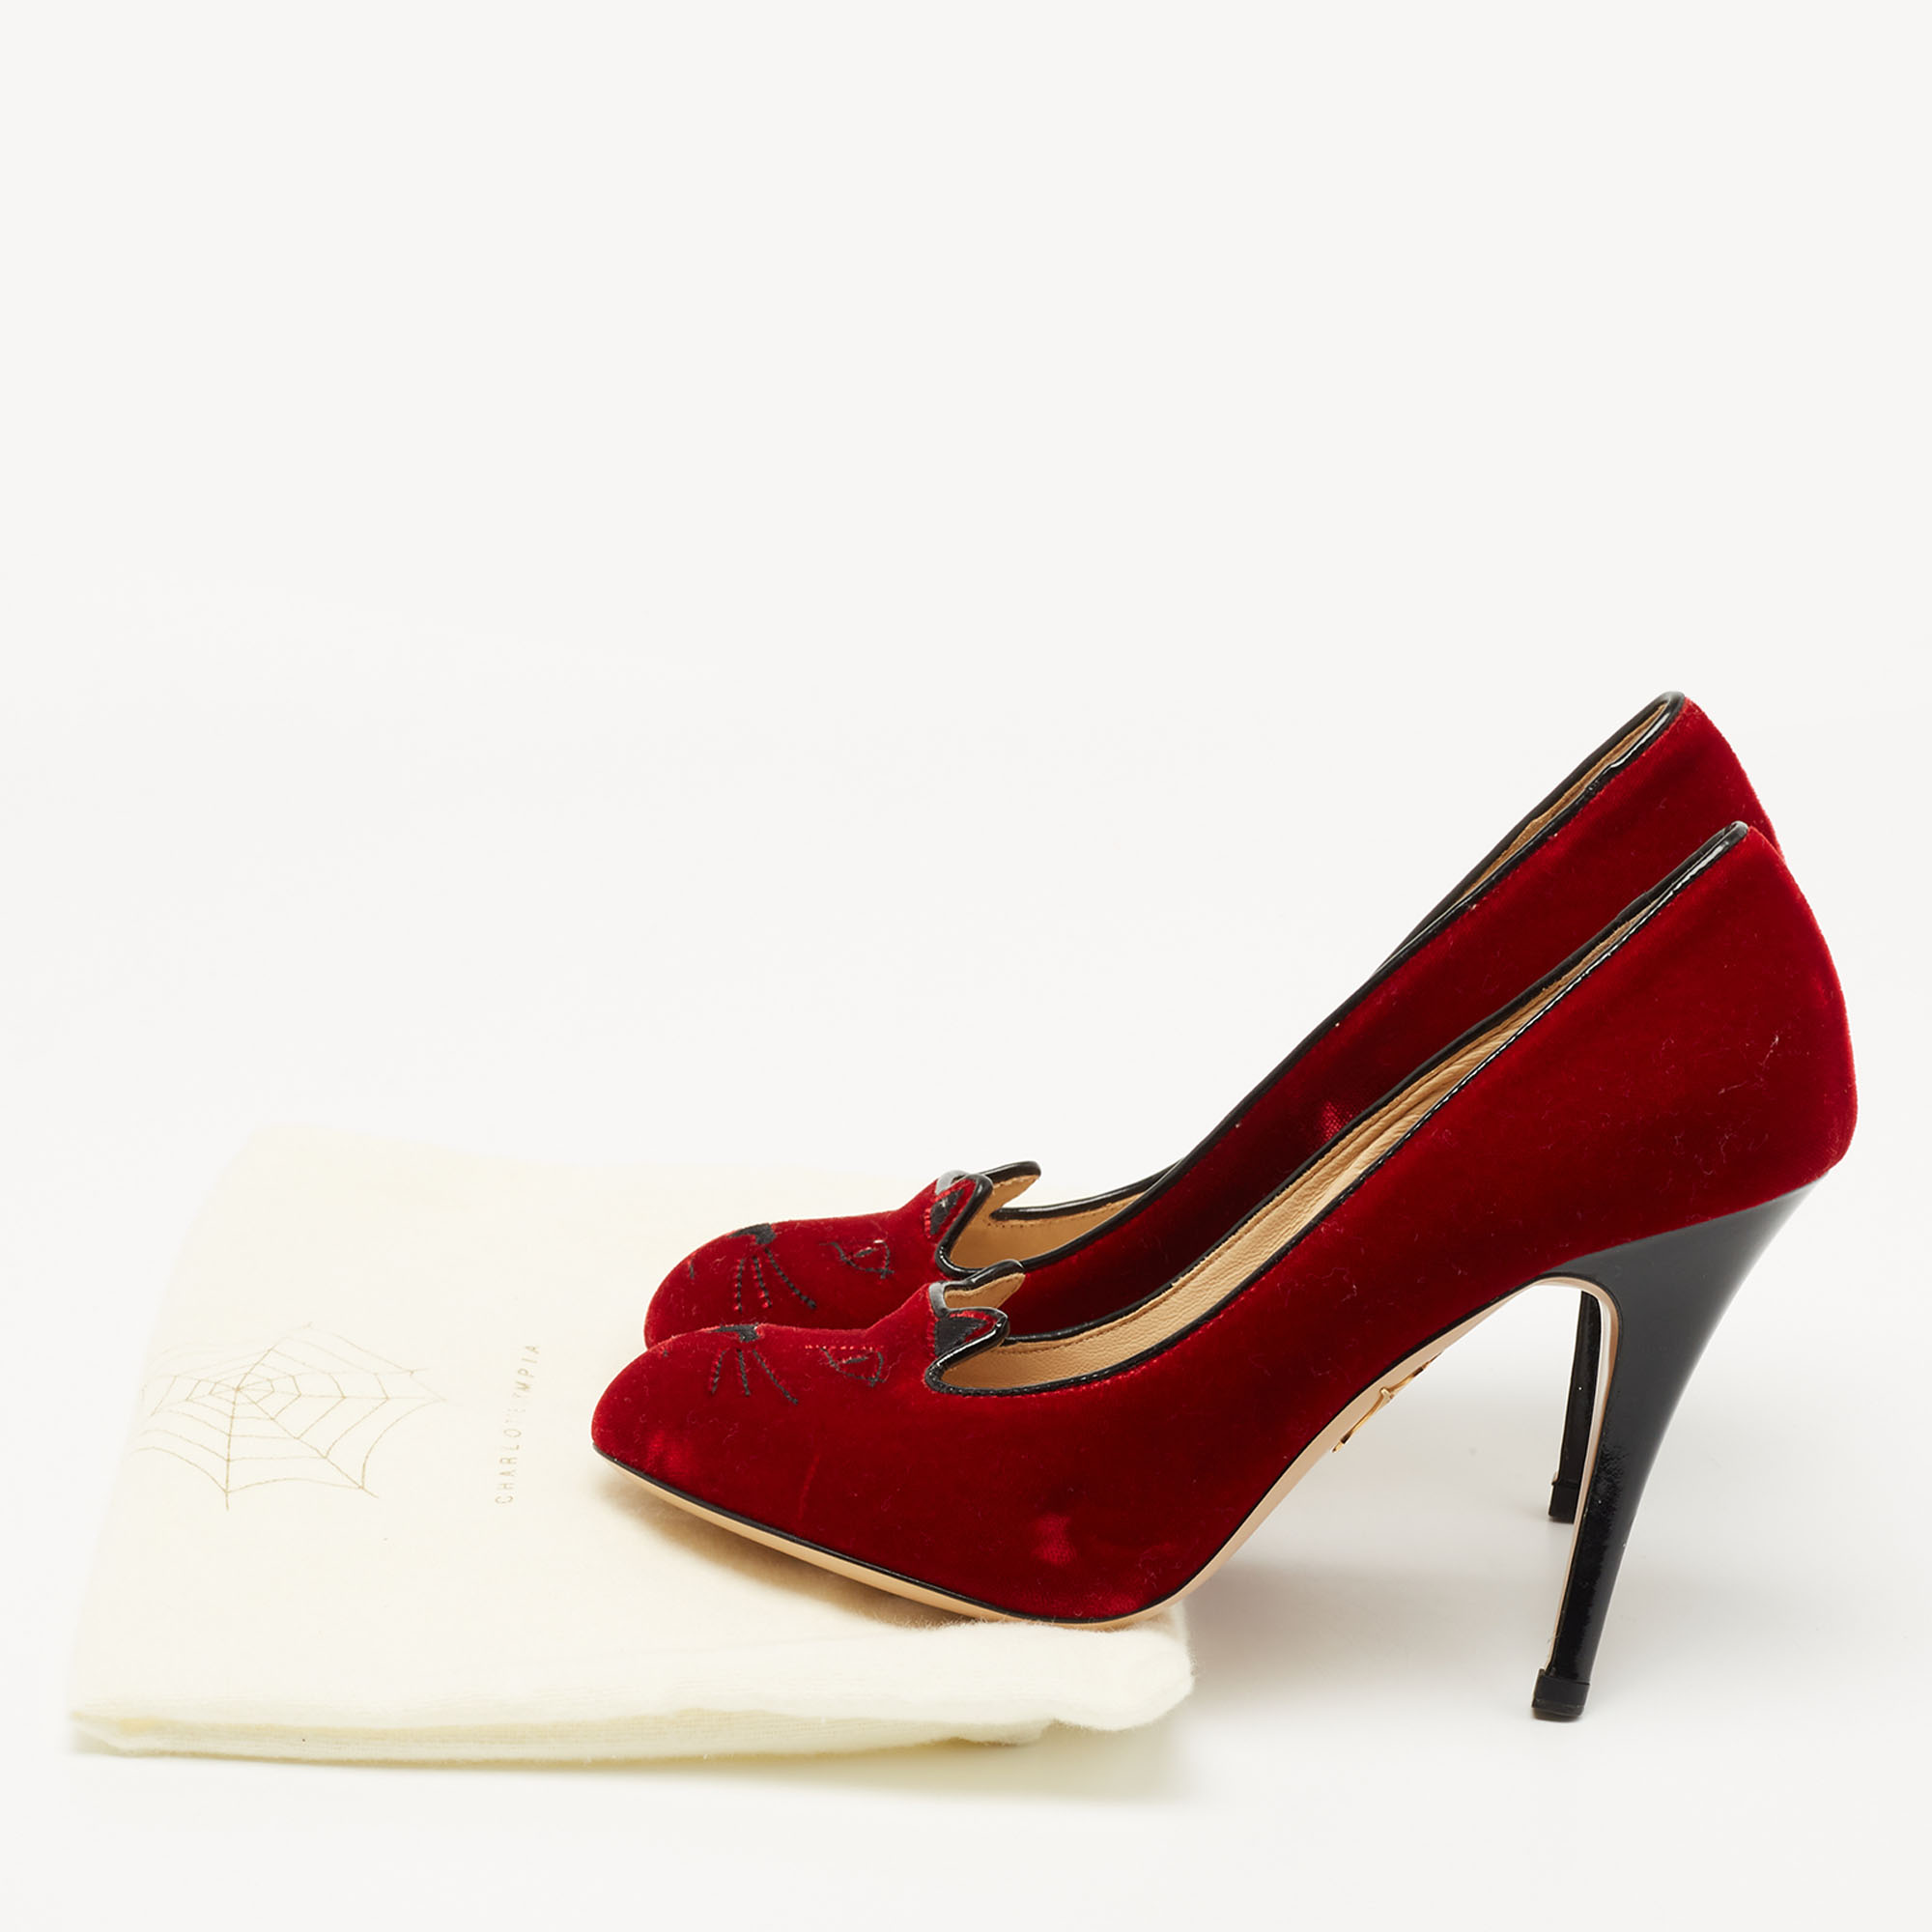 Charlotte Olympia Red Velvet Embroidered Kitty Pumps Size 37.5